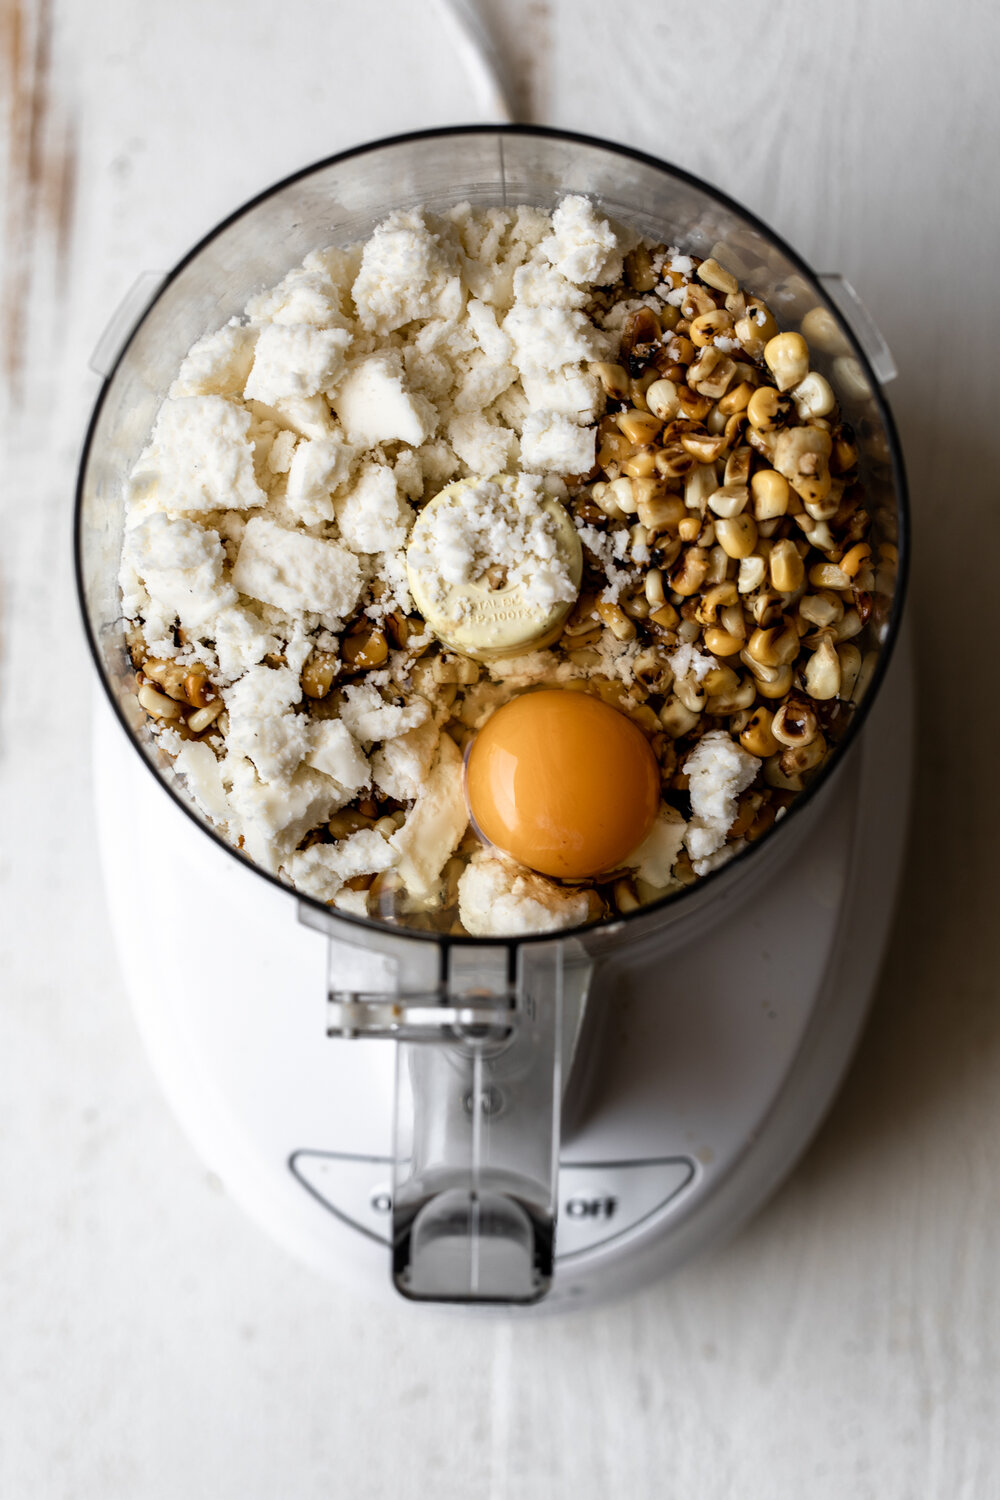 cotija cheese with roasted corn and egg in food processor